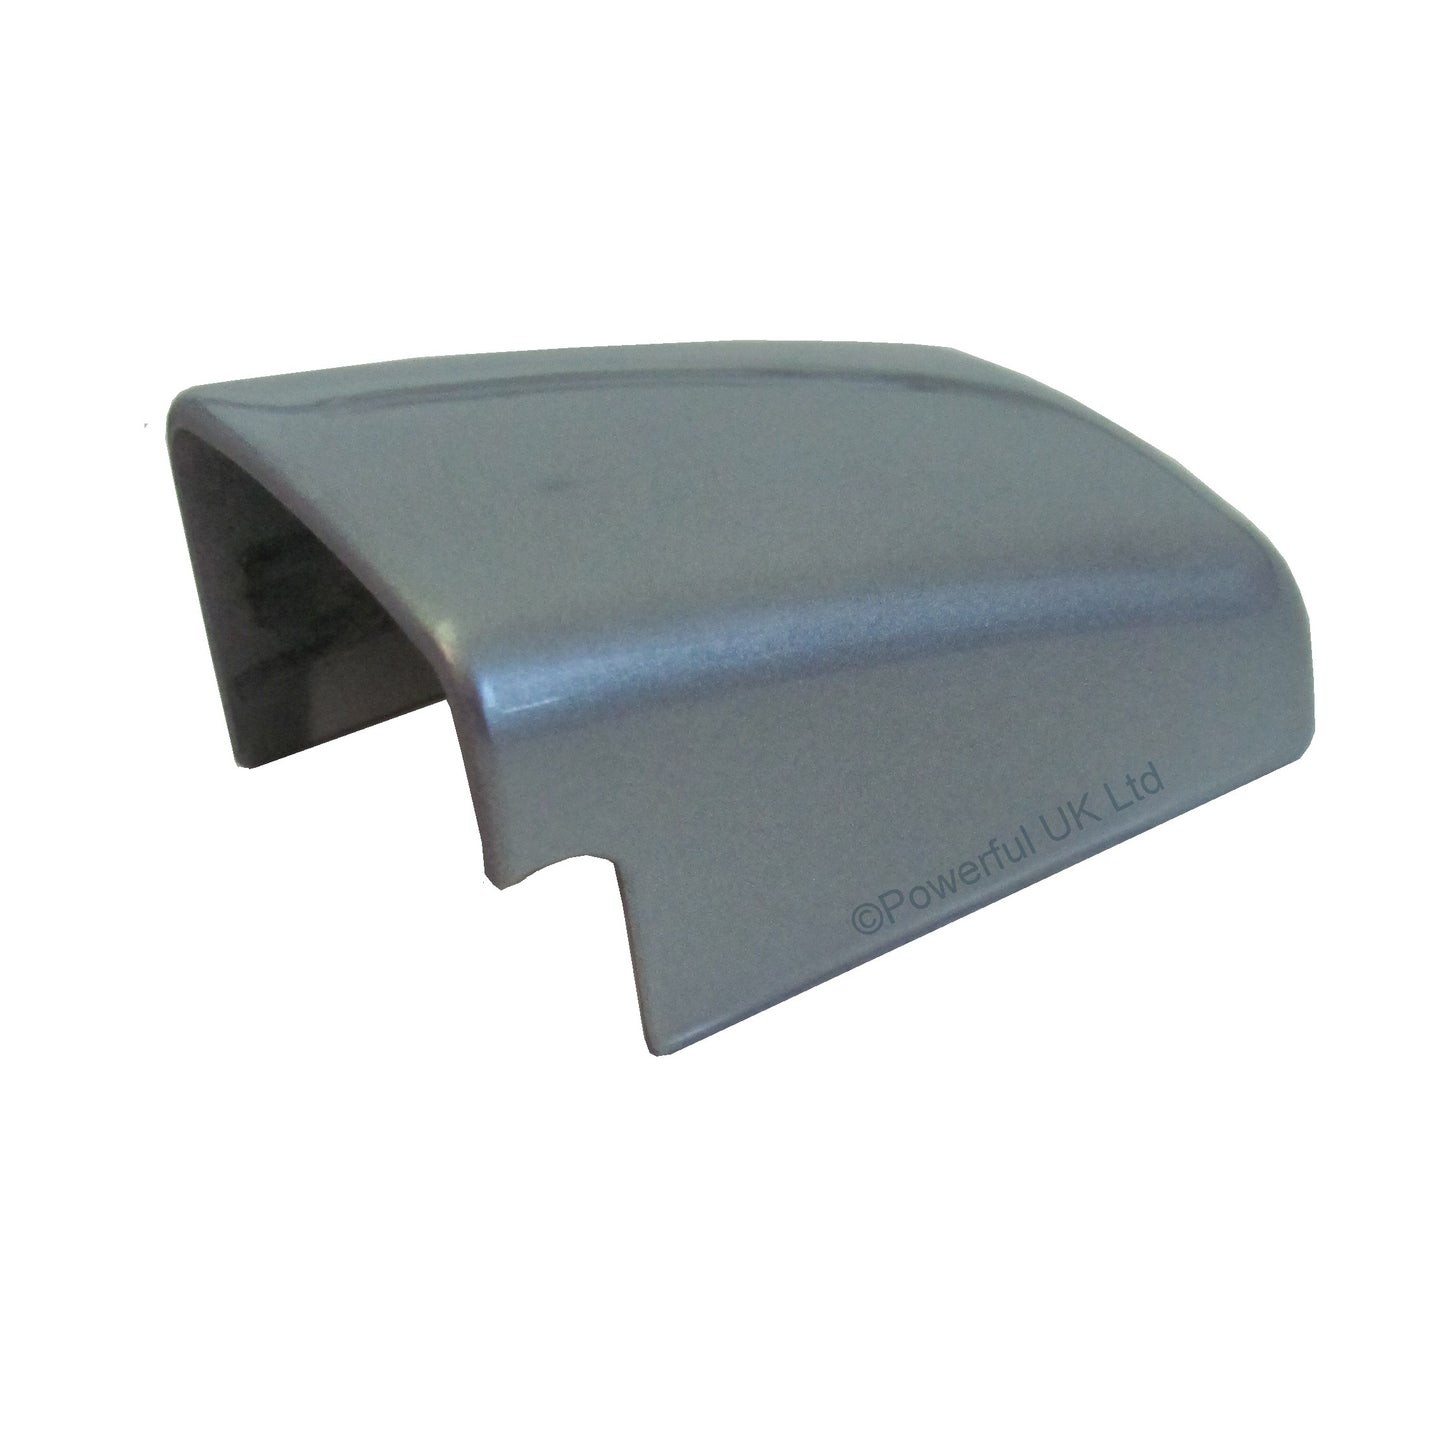 Door Handle Covers for Land Rover Freelander 2 fitted with 1 pc Handles  - Zermatt Silver